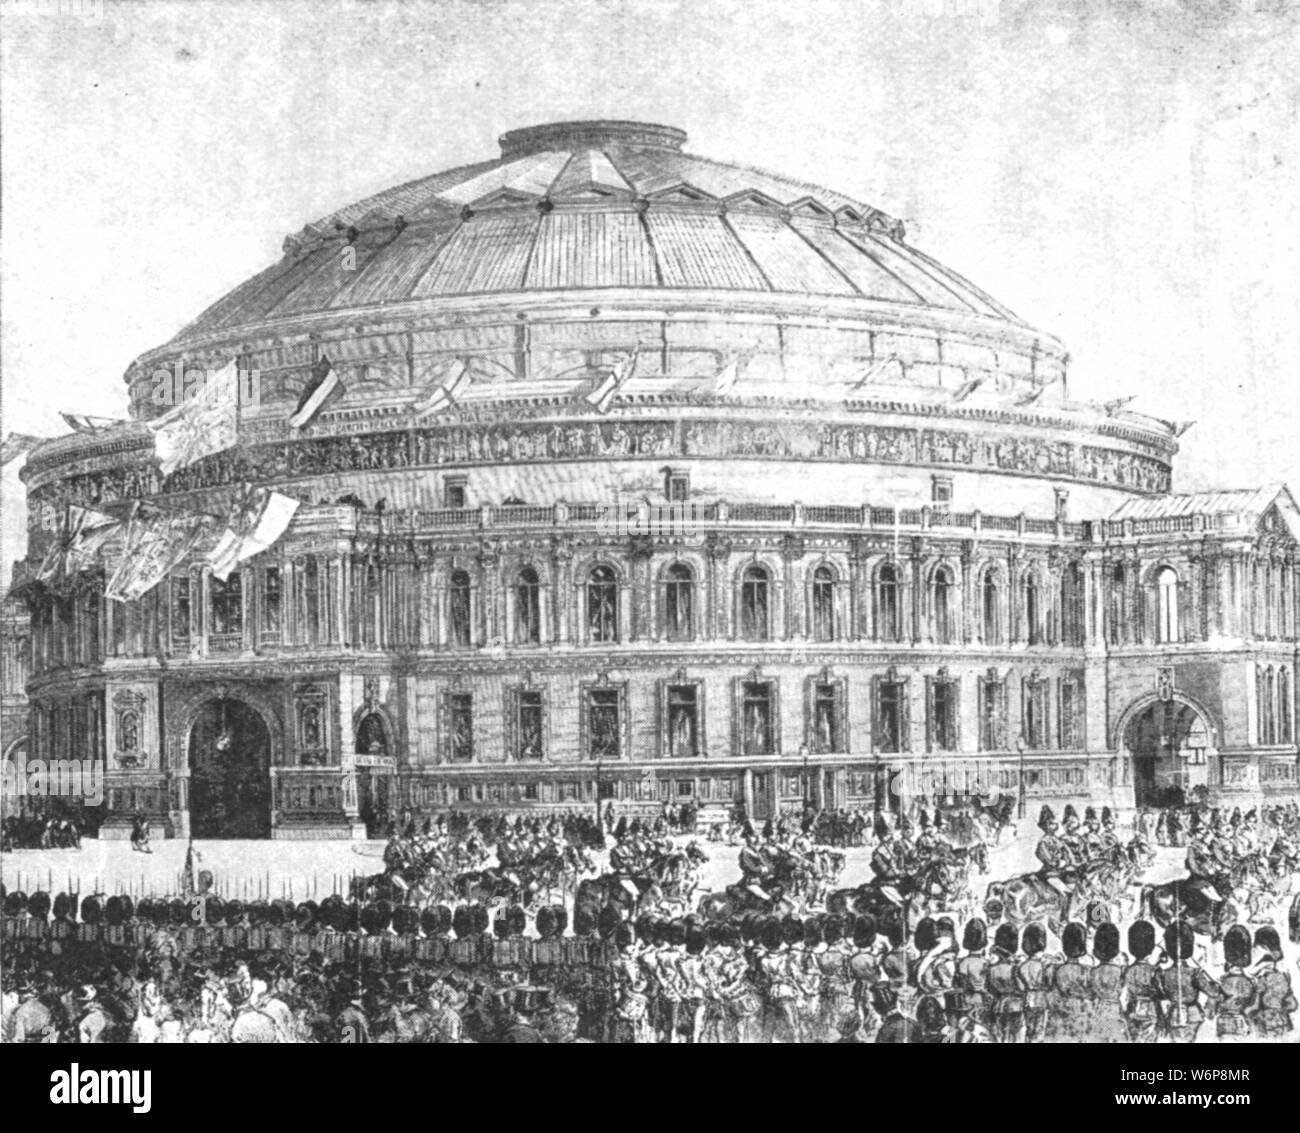 'The Royal Albert Hall, 1871: Opened by Queen Victoria, March 29', (1901). Queen Victoria (1819-1901) opening the concert hall in South Kensington, London. The building was originally to have been called the Central Hall of Arts and Sciences, but was renamed by Victoria in memory of her husband, Prince Albert, who died at the age of 42, and who had been instrumental in redeveloping the area which became known as 'Albertopolis'. From &quot;The Illustrated London News Record of the Glorious Reign of Queen Victoria 1837-1901: The Life and Accession of King Edward VII. and the Life of Queen Alexan Stock Photo